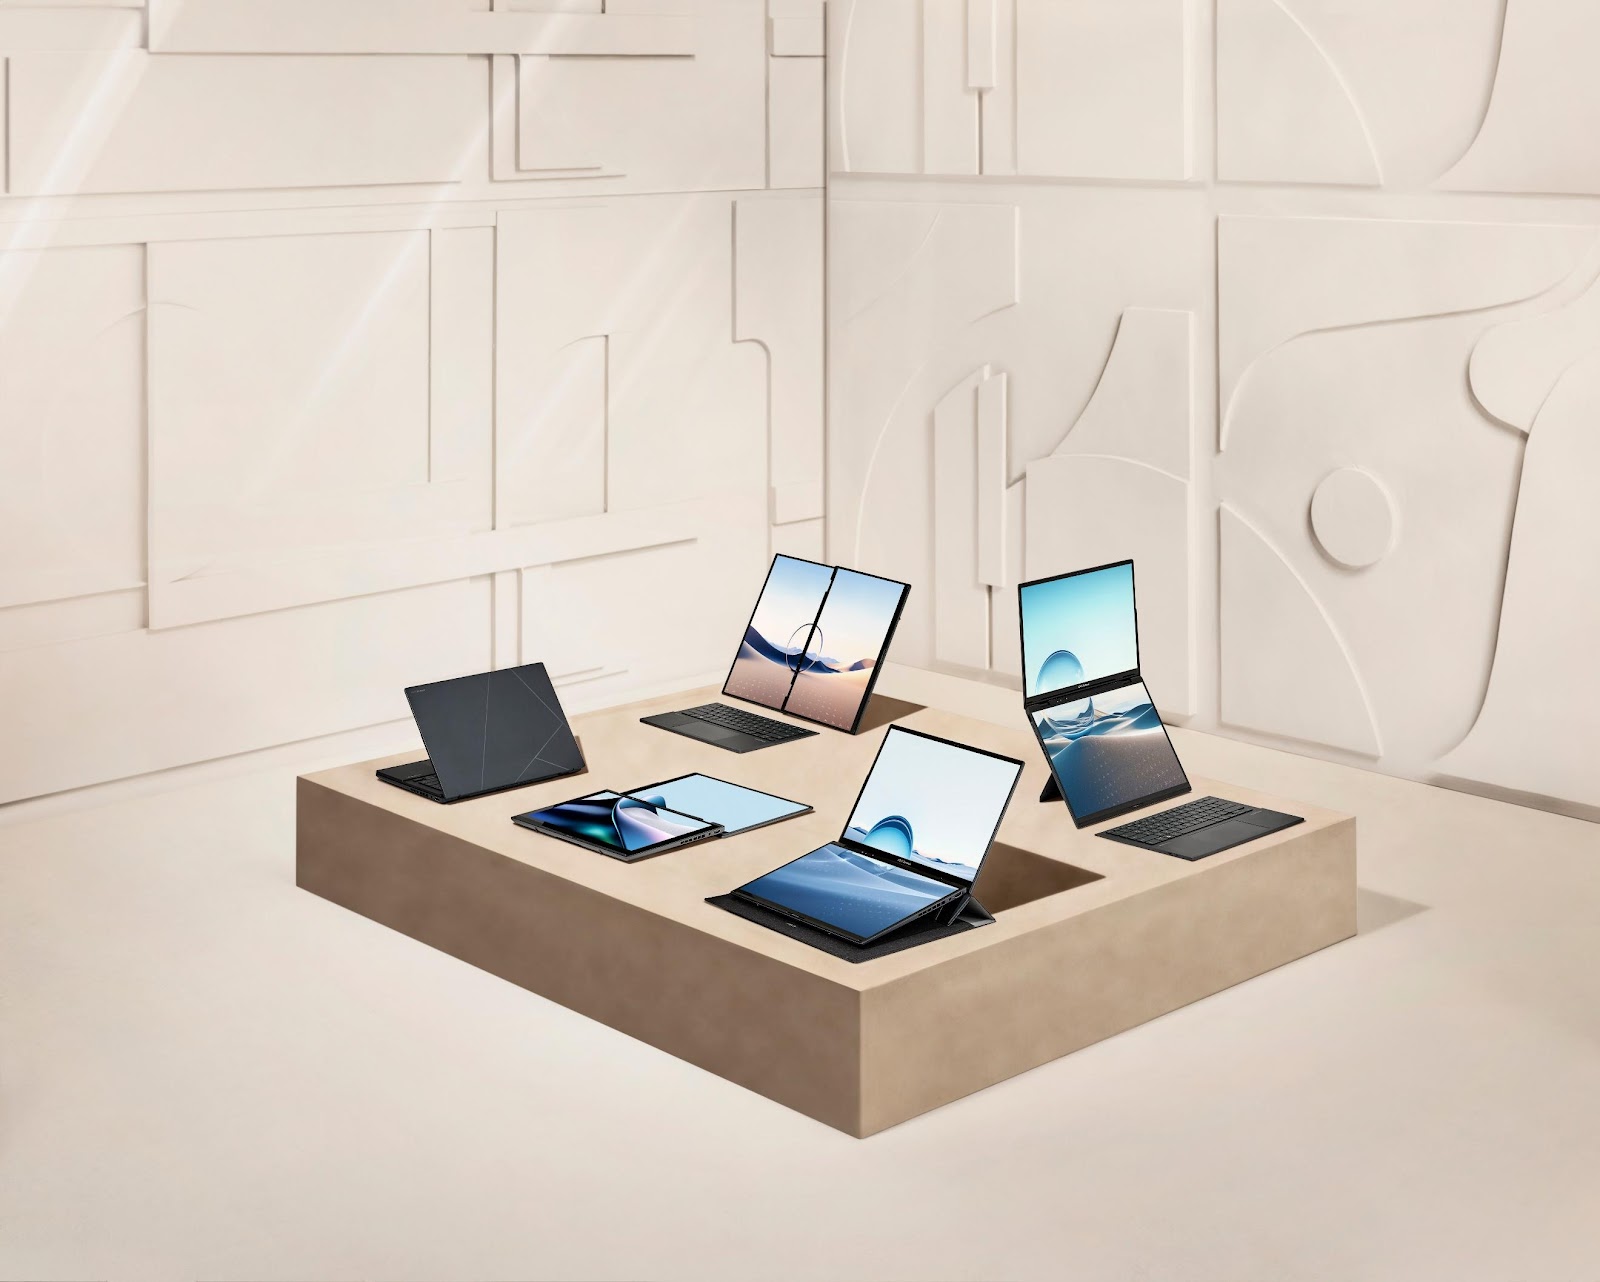 A group of laptops and tablets on a square table

Description automatically generated